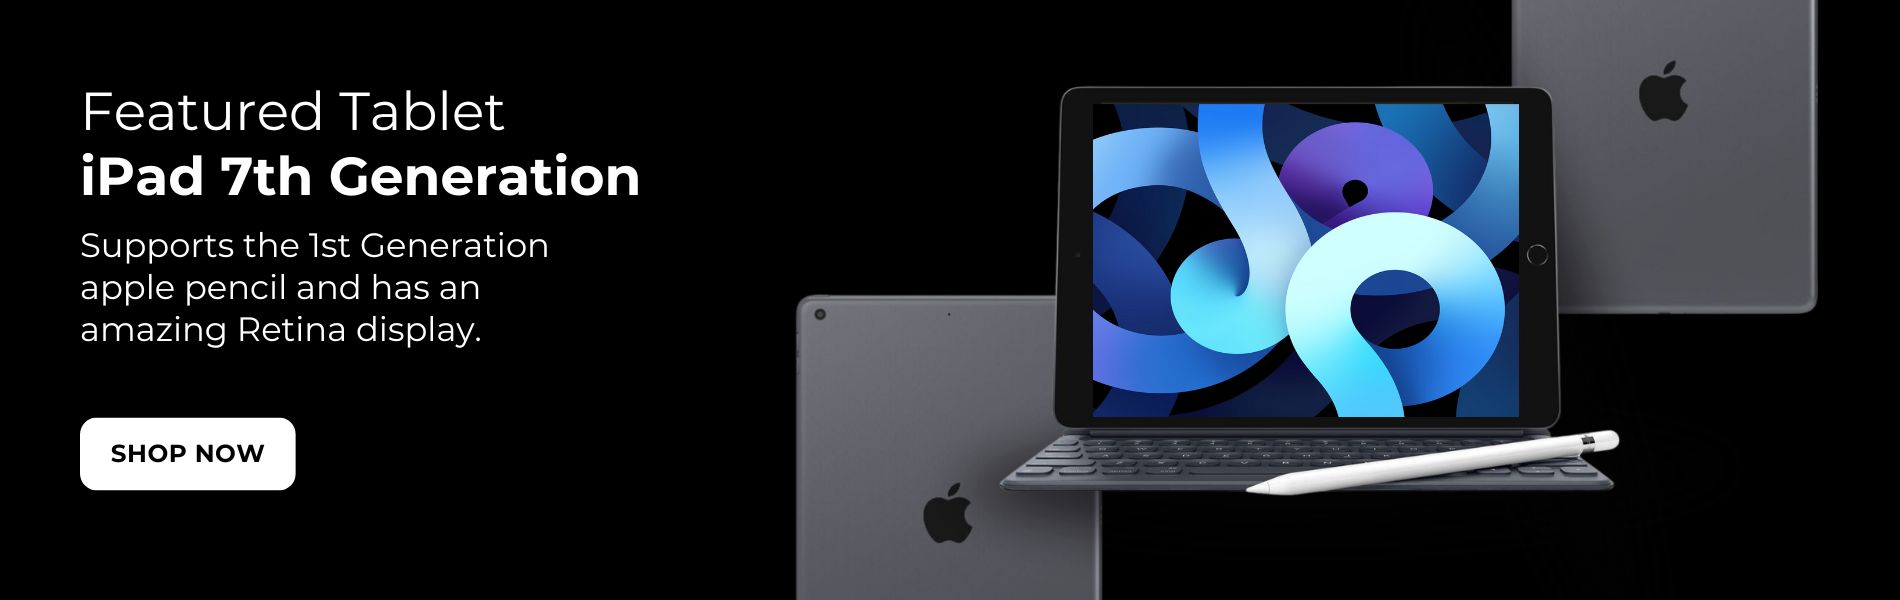 Image showing featured ipad 7th generation